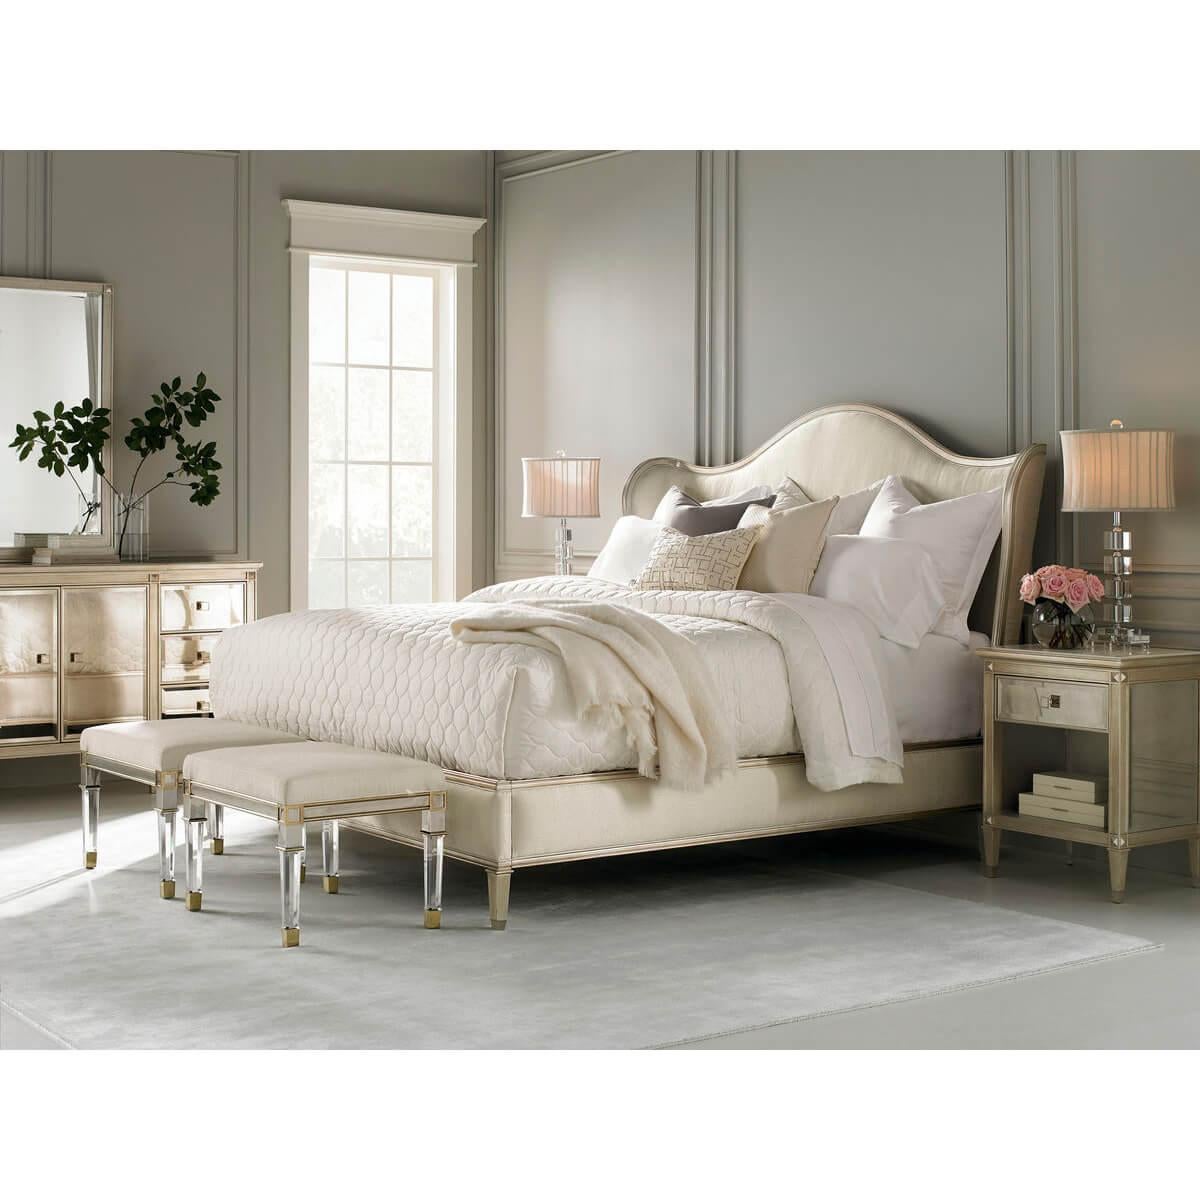 Wood Transitional Style Upholstered Queen Bed For Sale